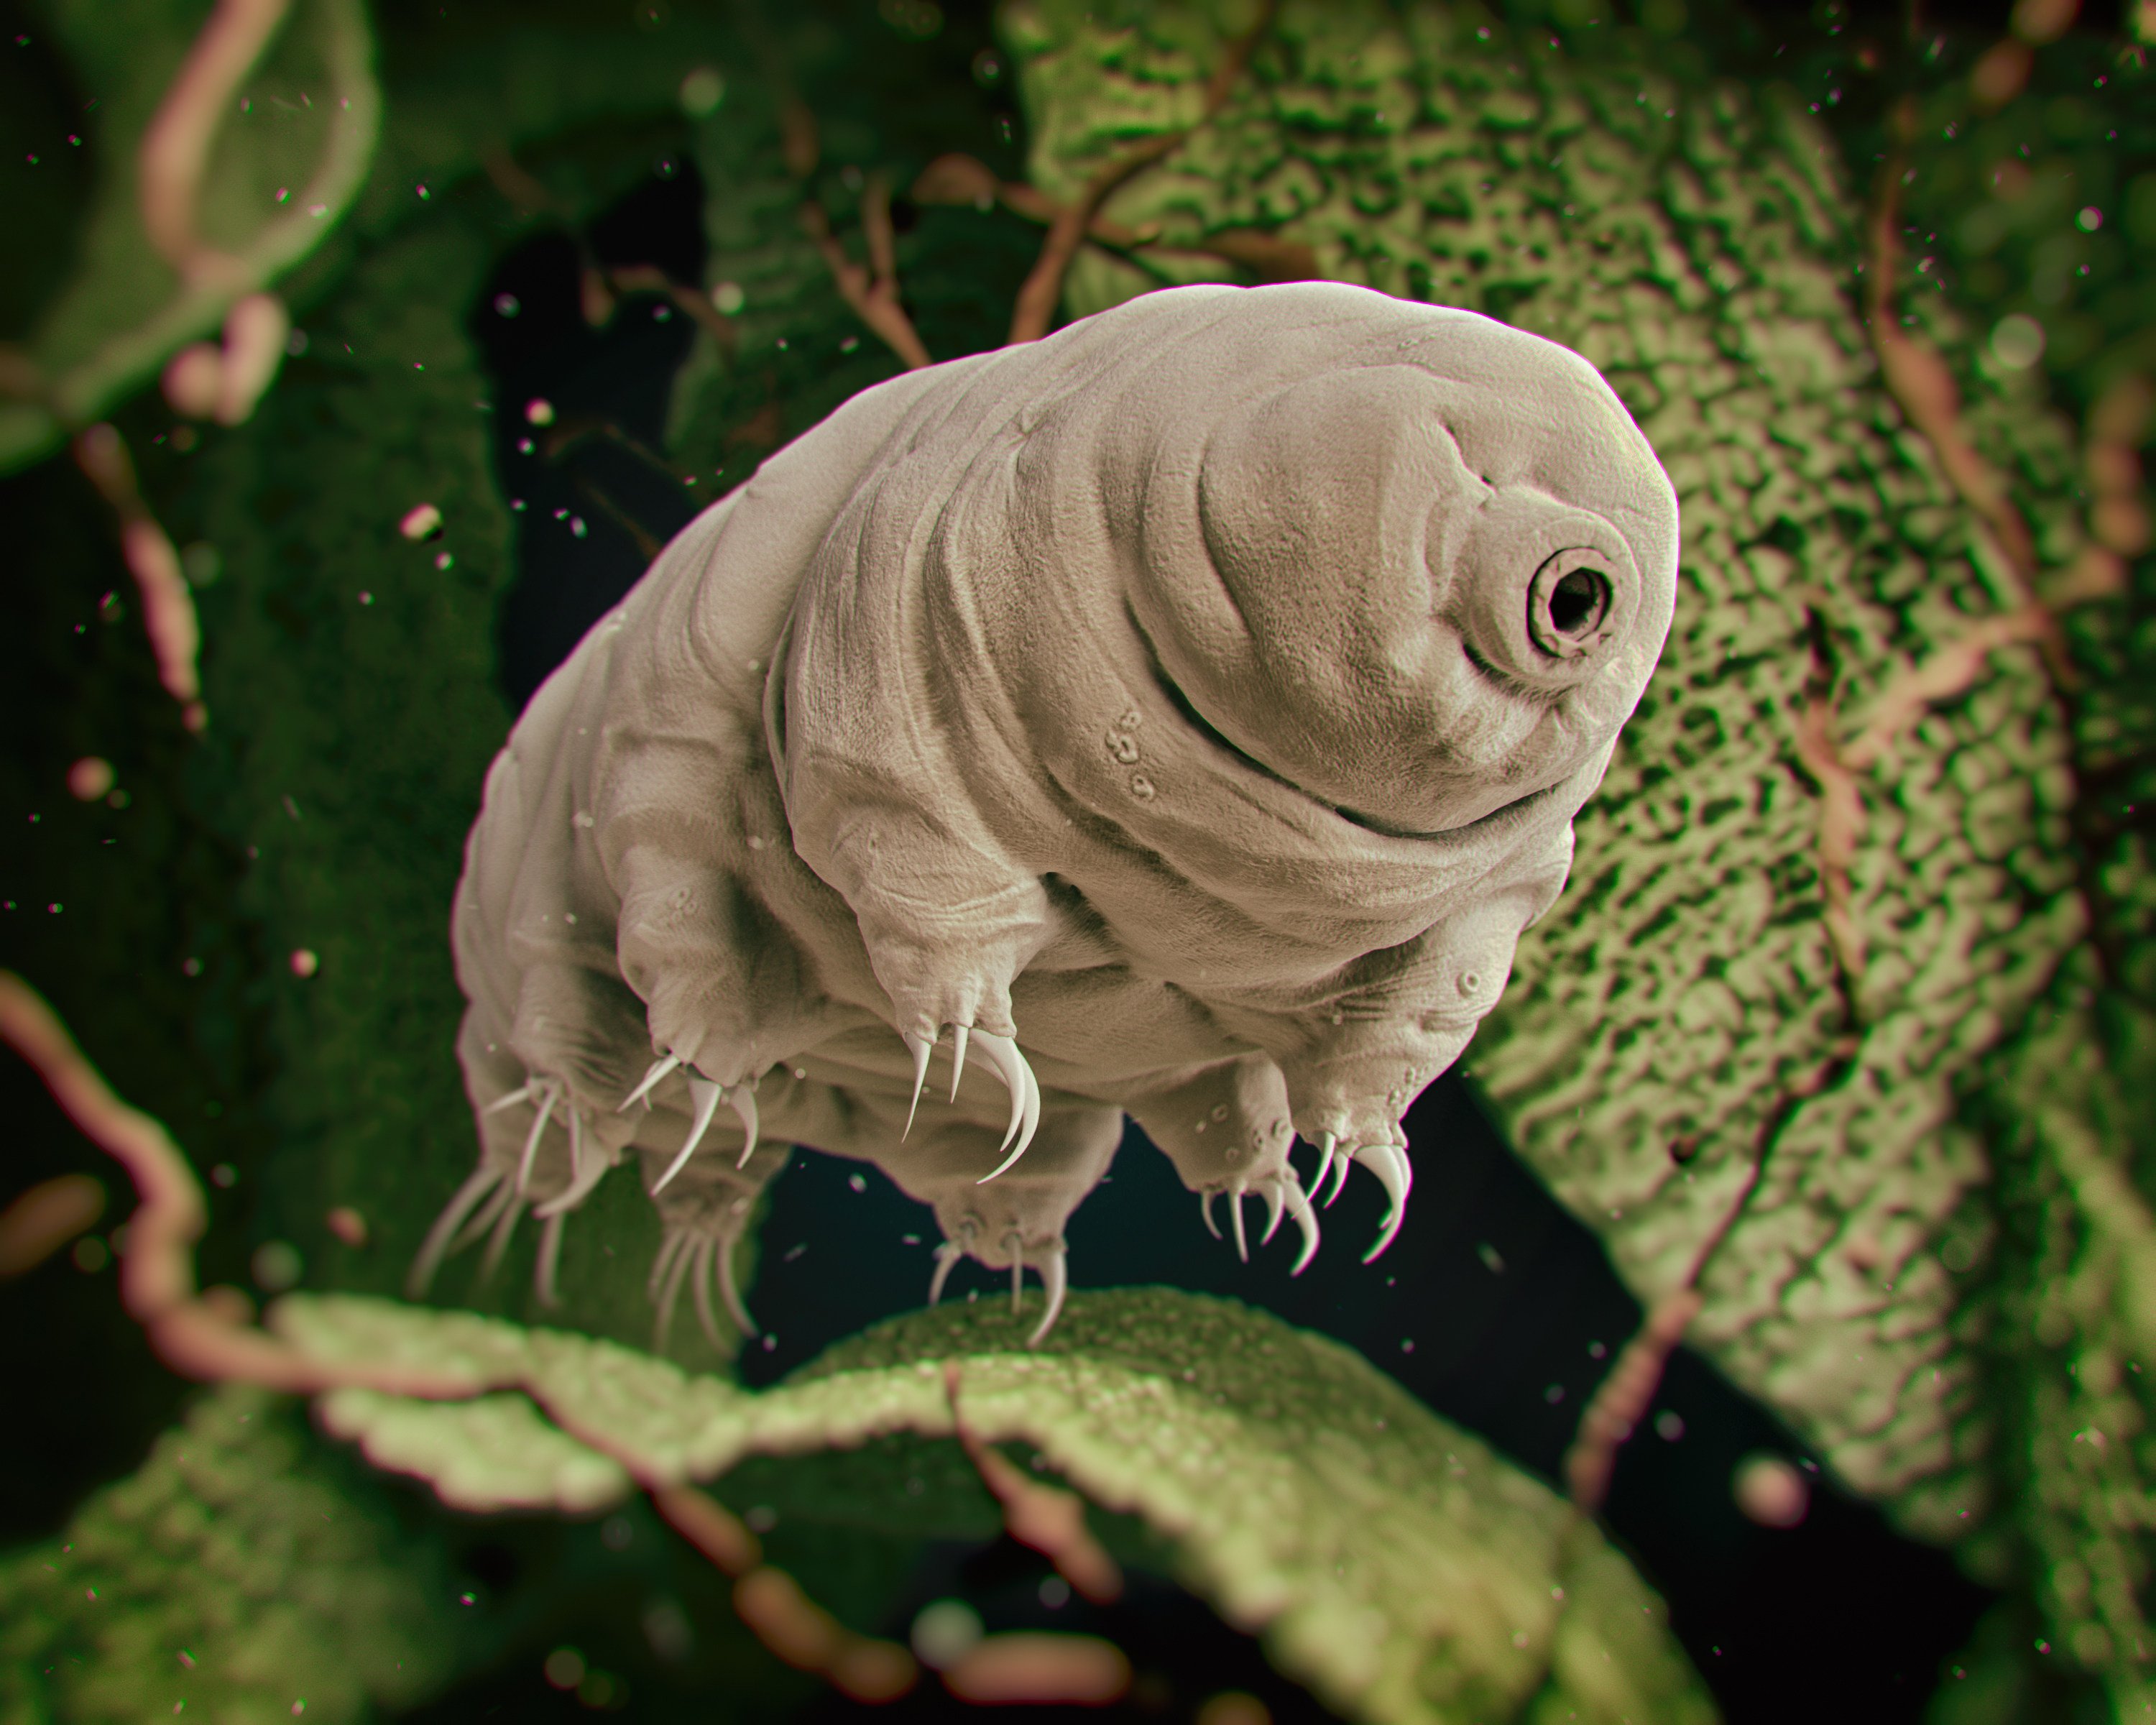 A 3D rendered illustration of a water bear, or Tardigrade. Image: Shutterstock